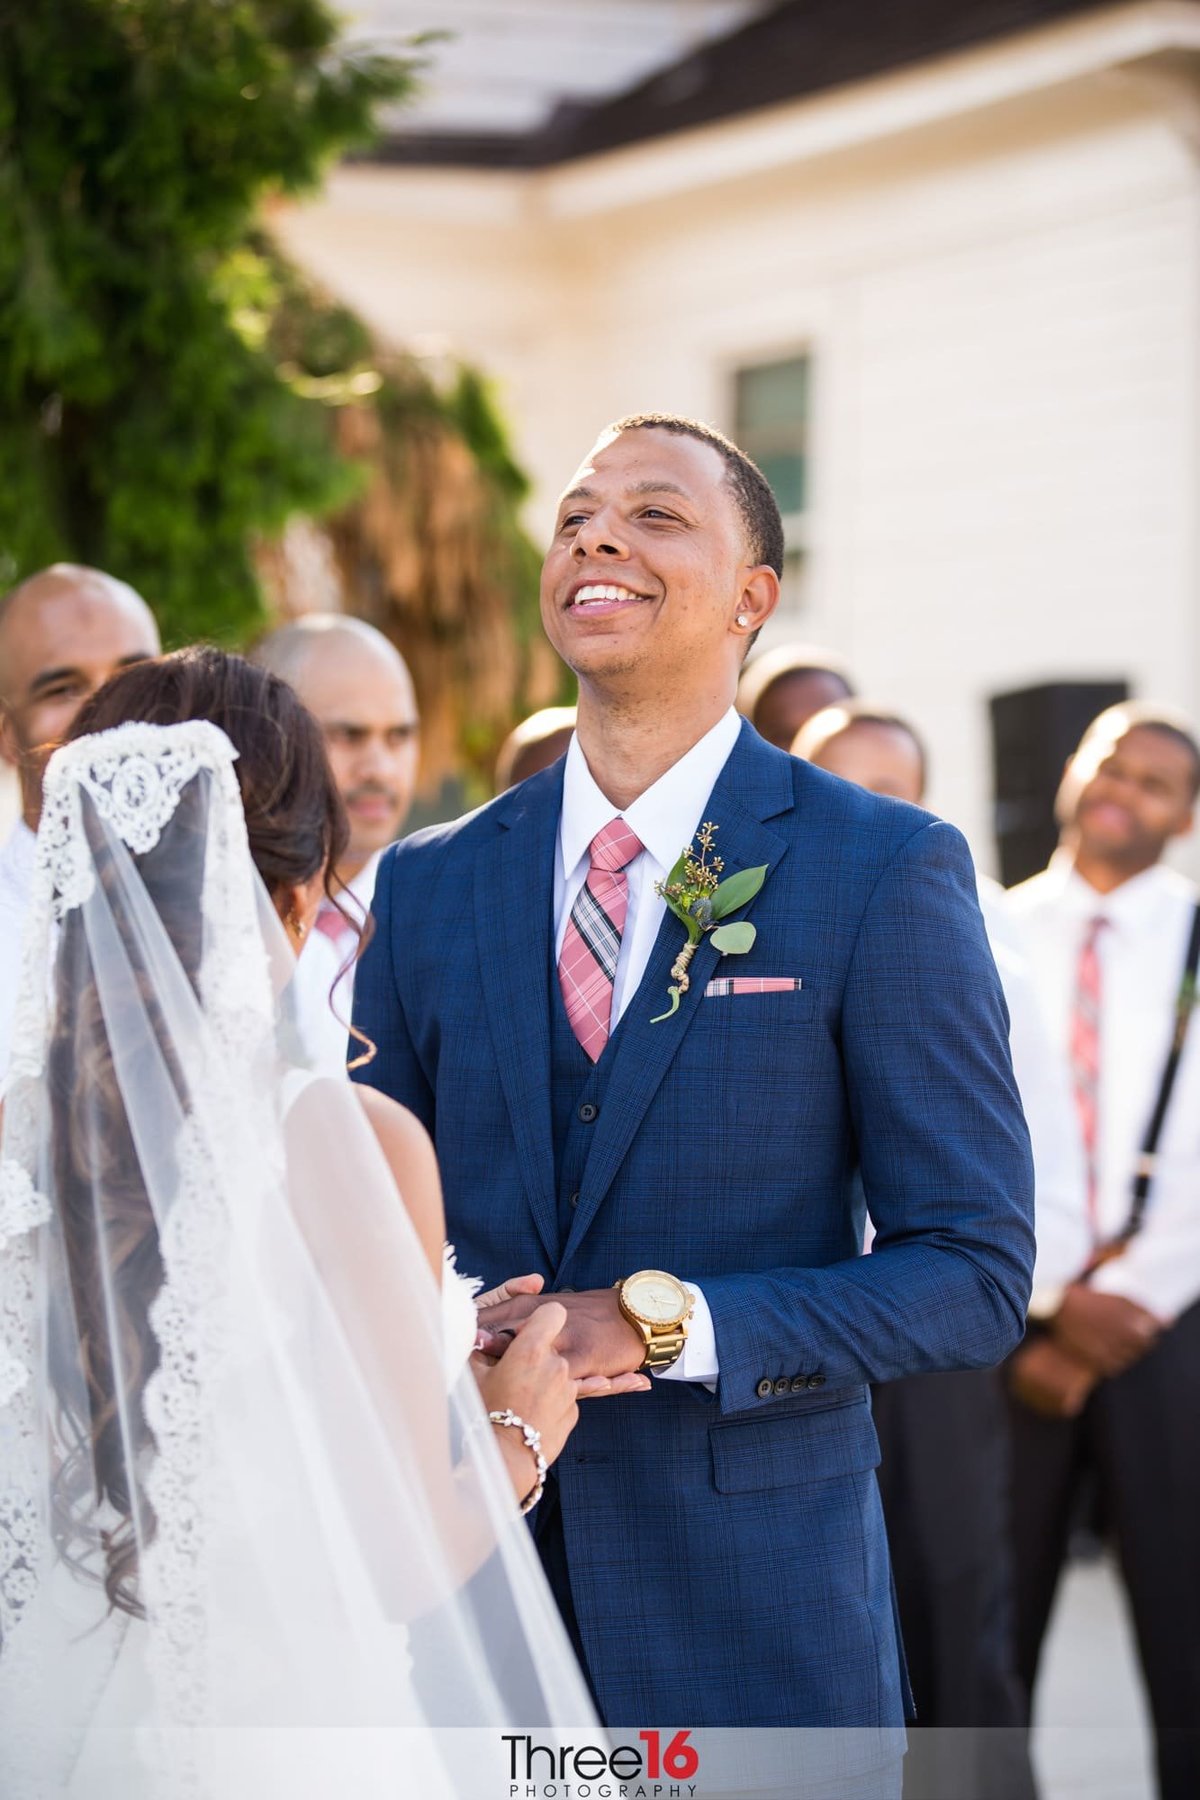 Groom laughs during the wedding ceremony